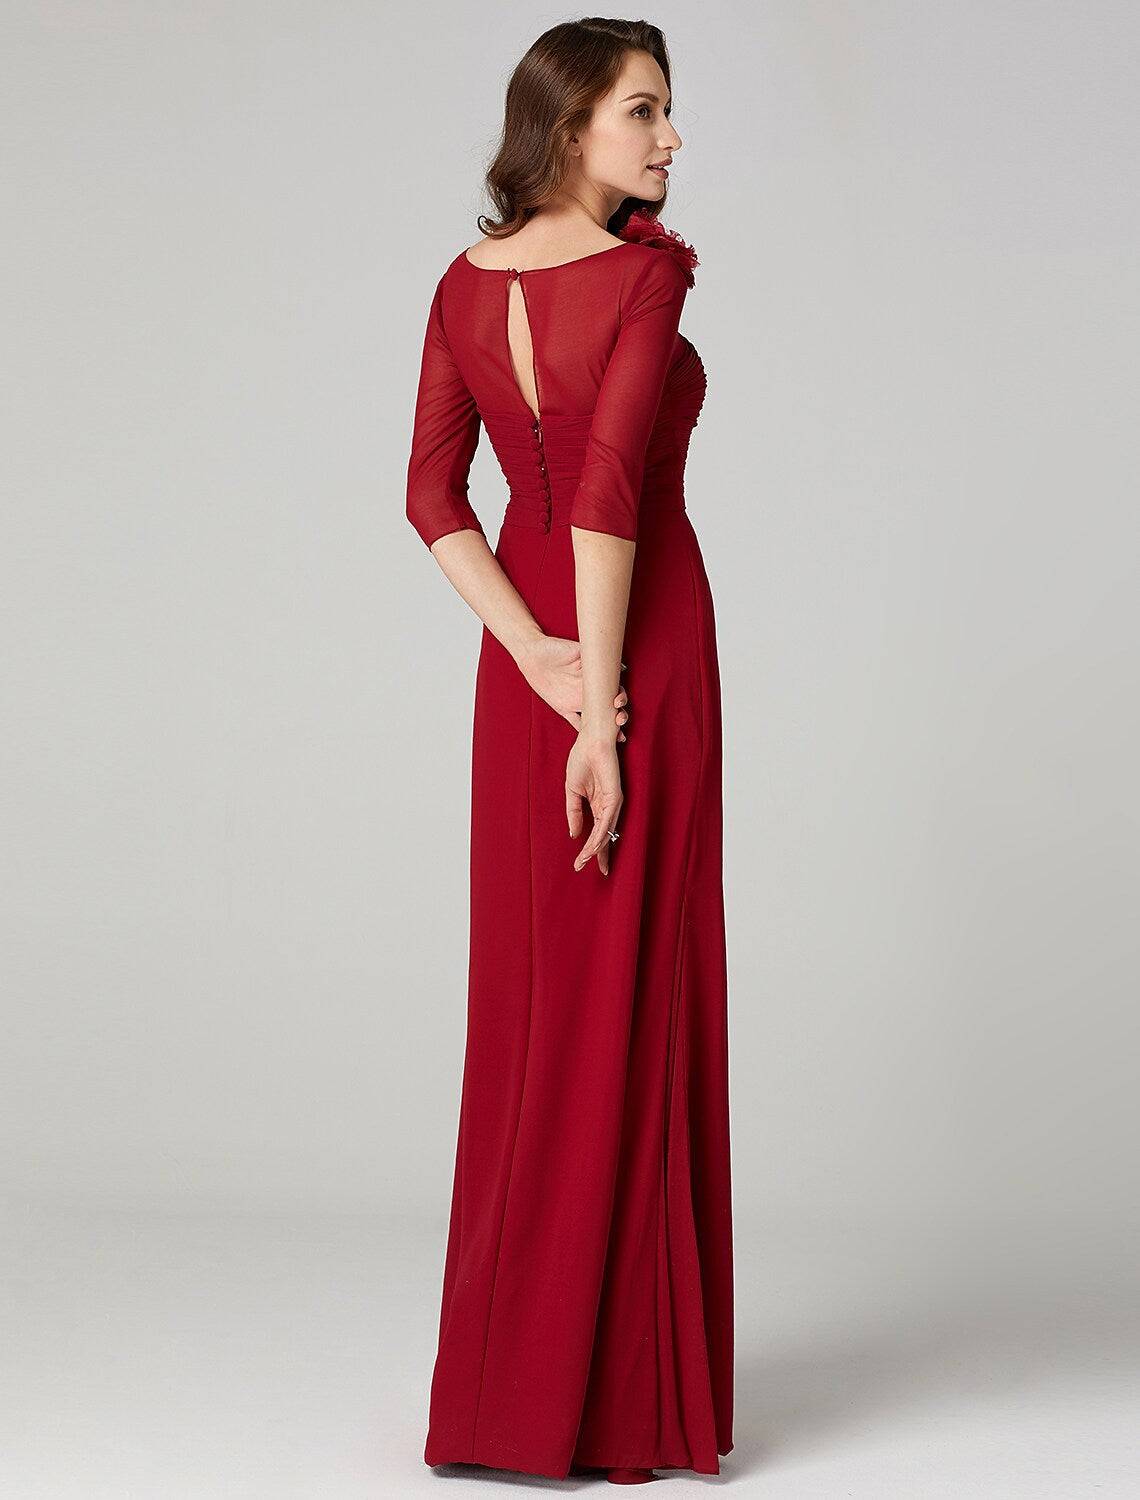 Evening Dress Floor Length Length Sleeve Neck Charmeuse with Ruched Flower